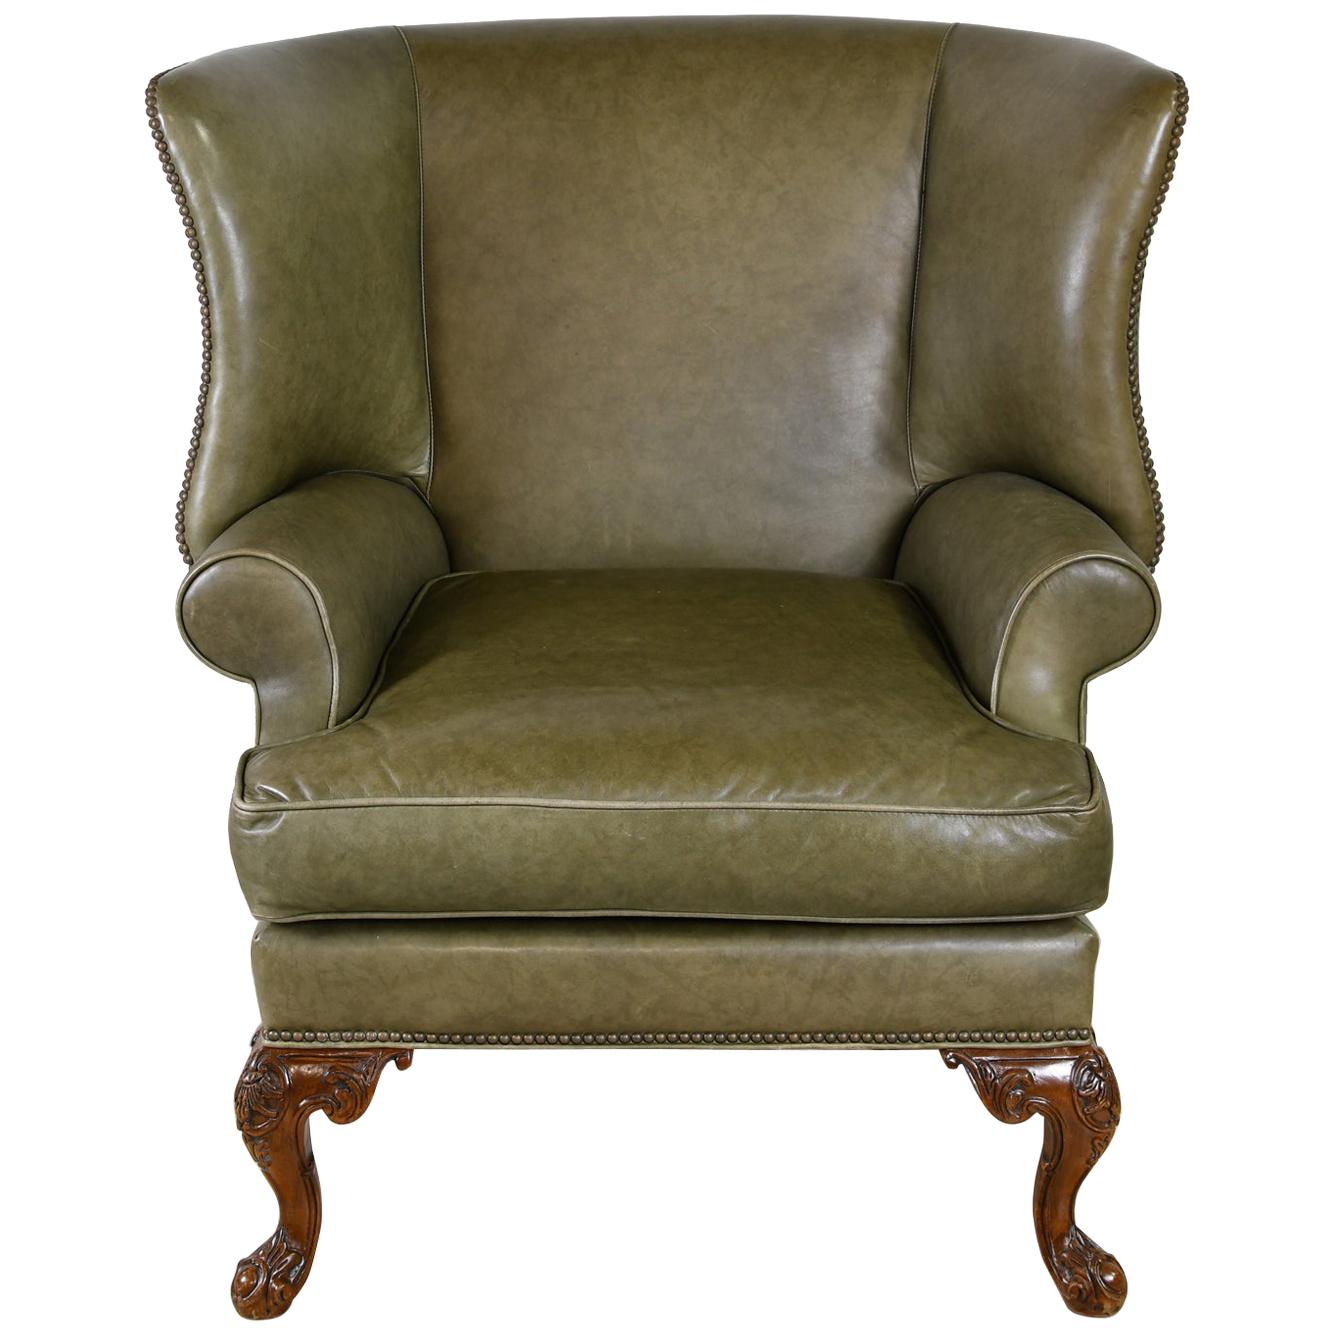 Large Vintage Wingback Armchair with Sage-Green Leather Upholstery